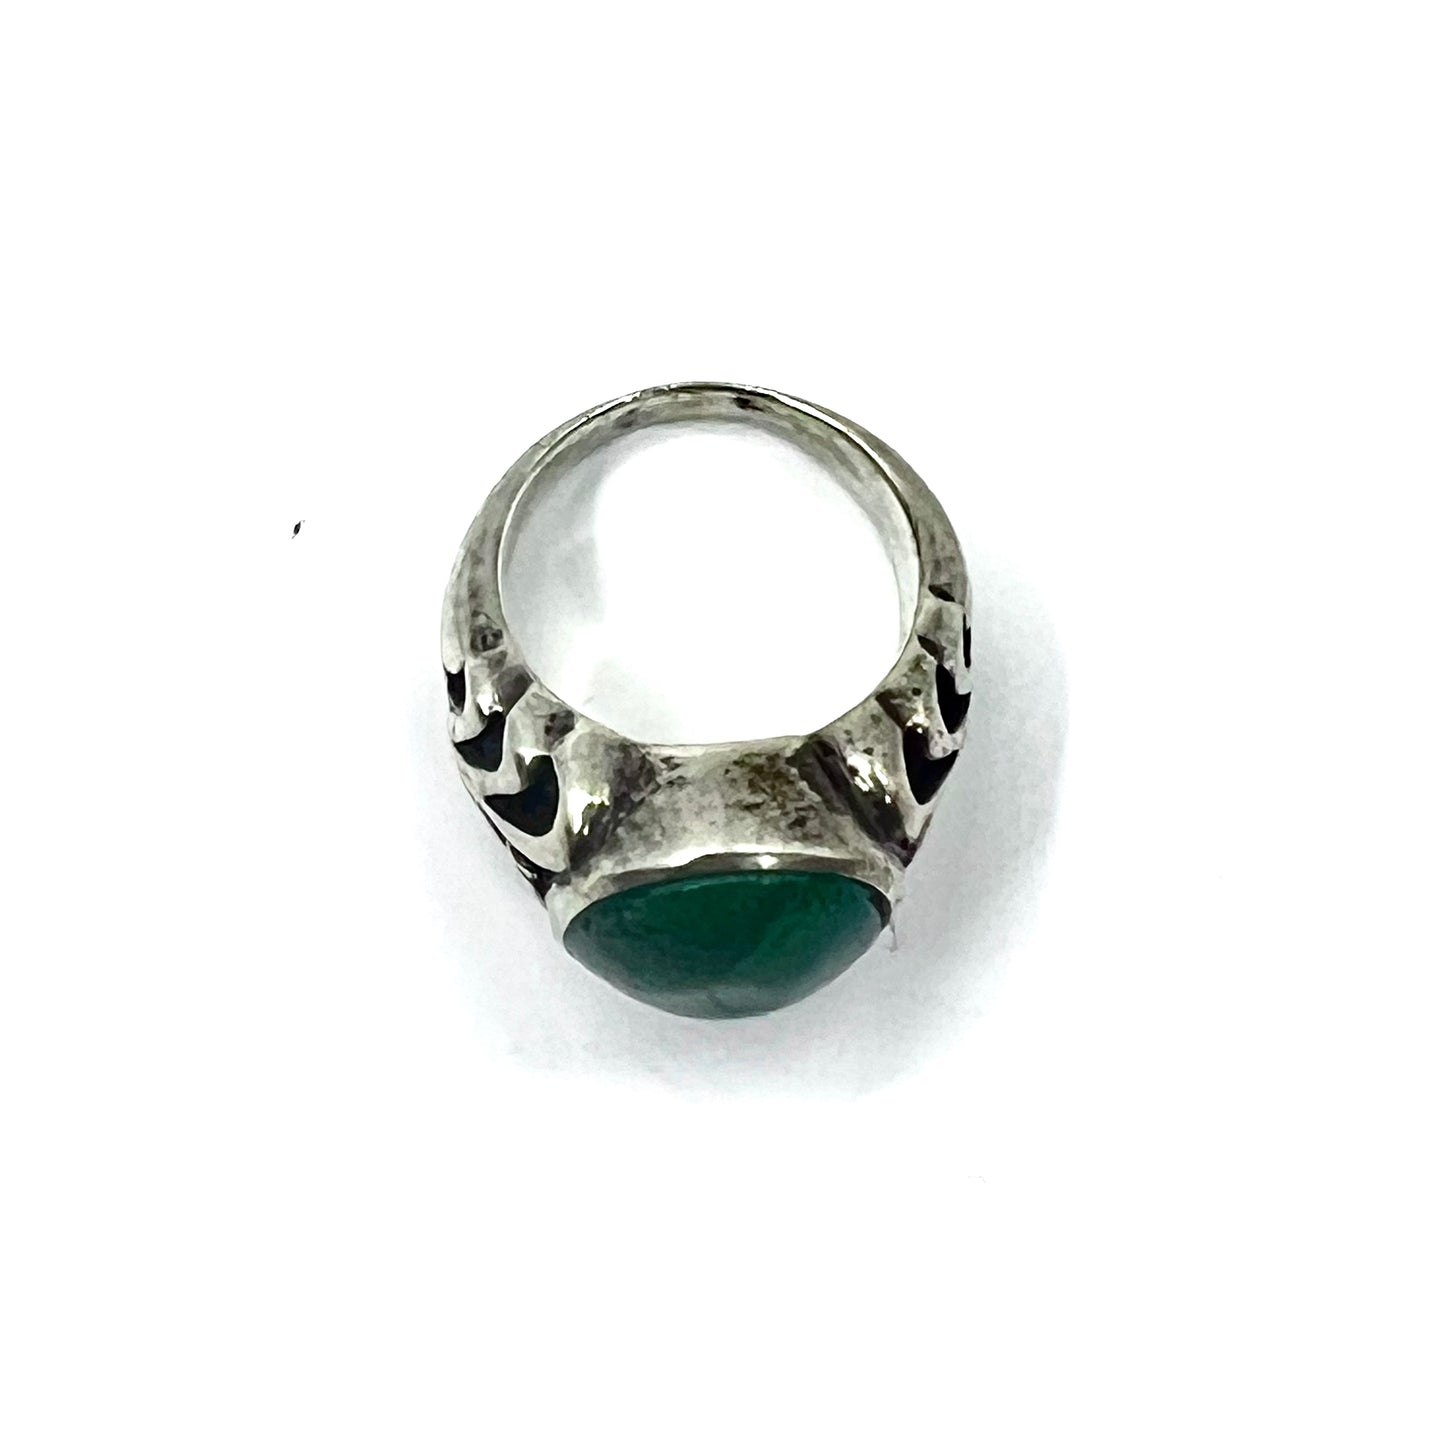 Vintage Indian Jewelry Turquoise Ring インディアンジュエリー ターコイズリング 指輪 17号 SILVER 925 グリーンターコイズ